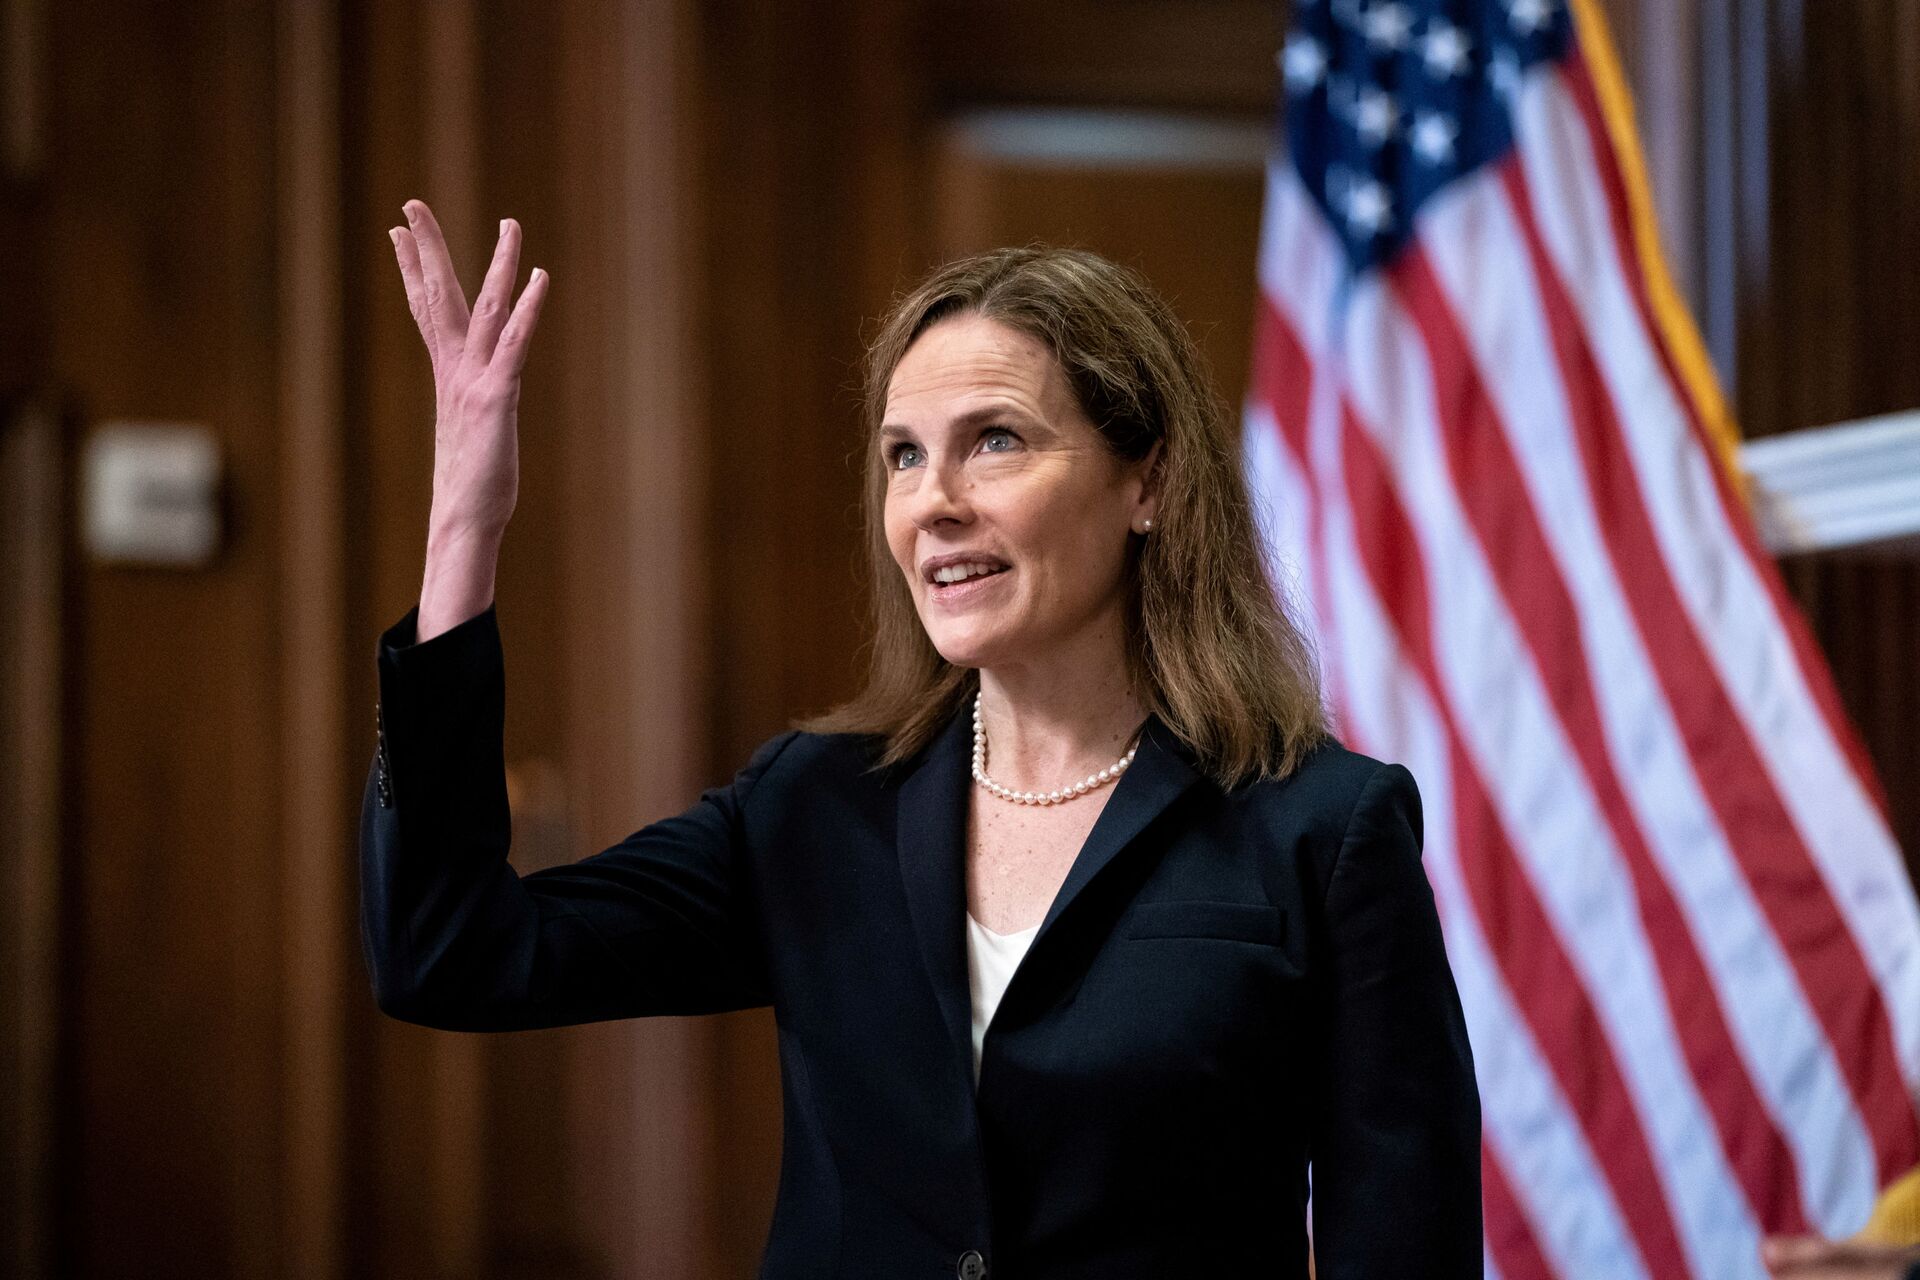 FILE PHOTO: Judge Amy Coney Barrett, U.S. President Donald Trump's Nominee for Supreme Court, gestures during a photo before a meeting with Senator Roy Blunt (R-Mo) on Capitol Hill in Washington DC, U.S. October 21, 2020 - Sputnik International, 1920, 15.10.2021